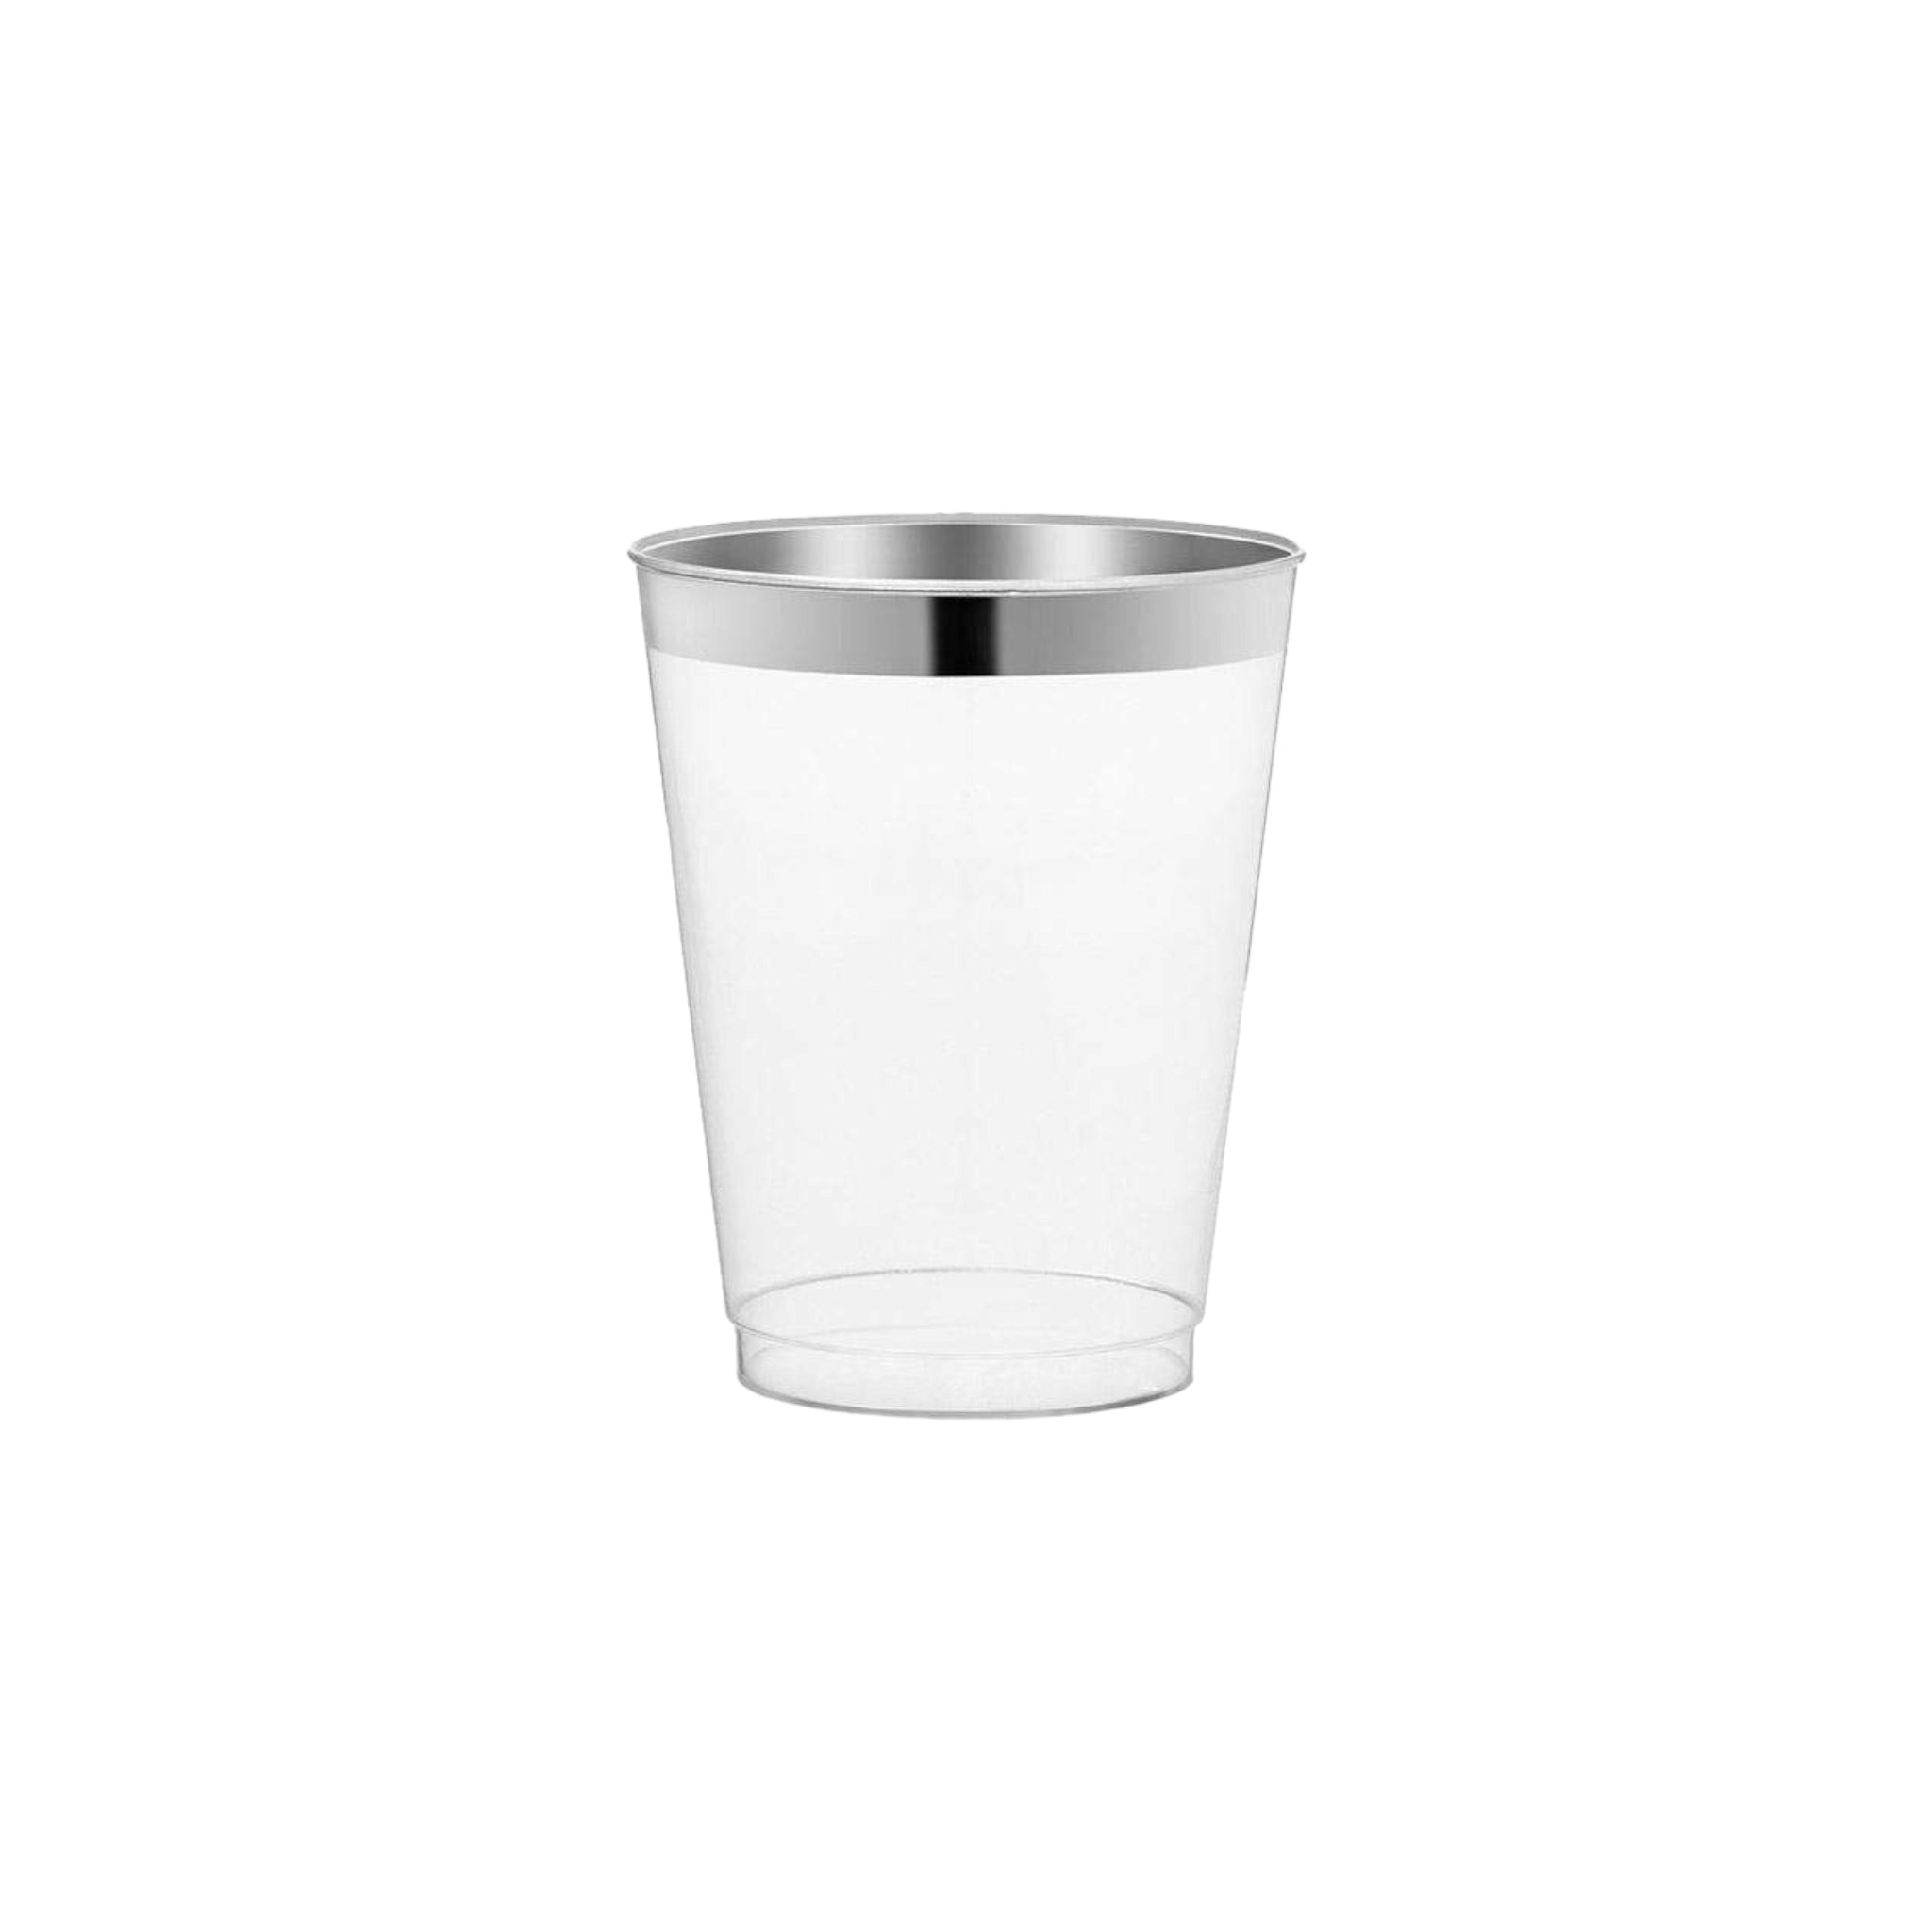 Disposable Plastic Acrylic 300ml Party Smoothie Cup with Metallic Silver Rim 10pack